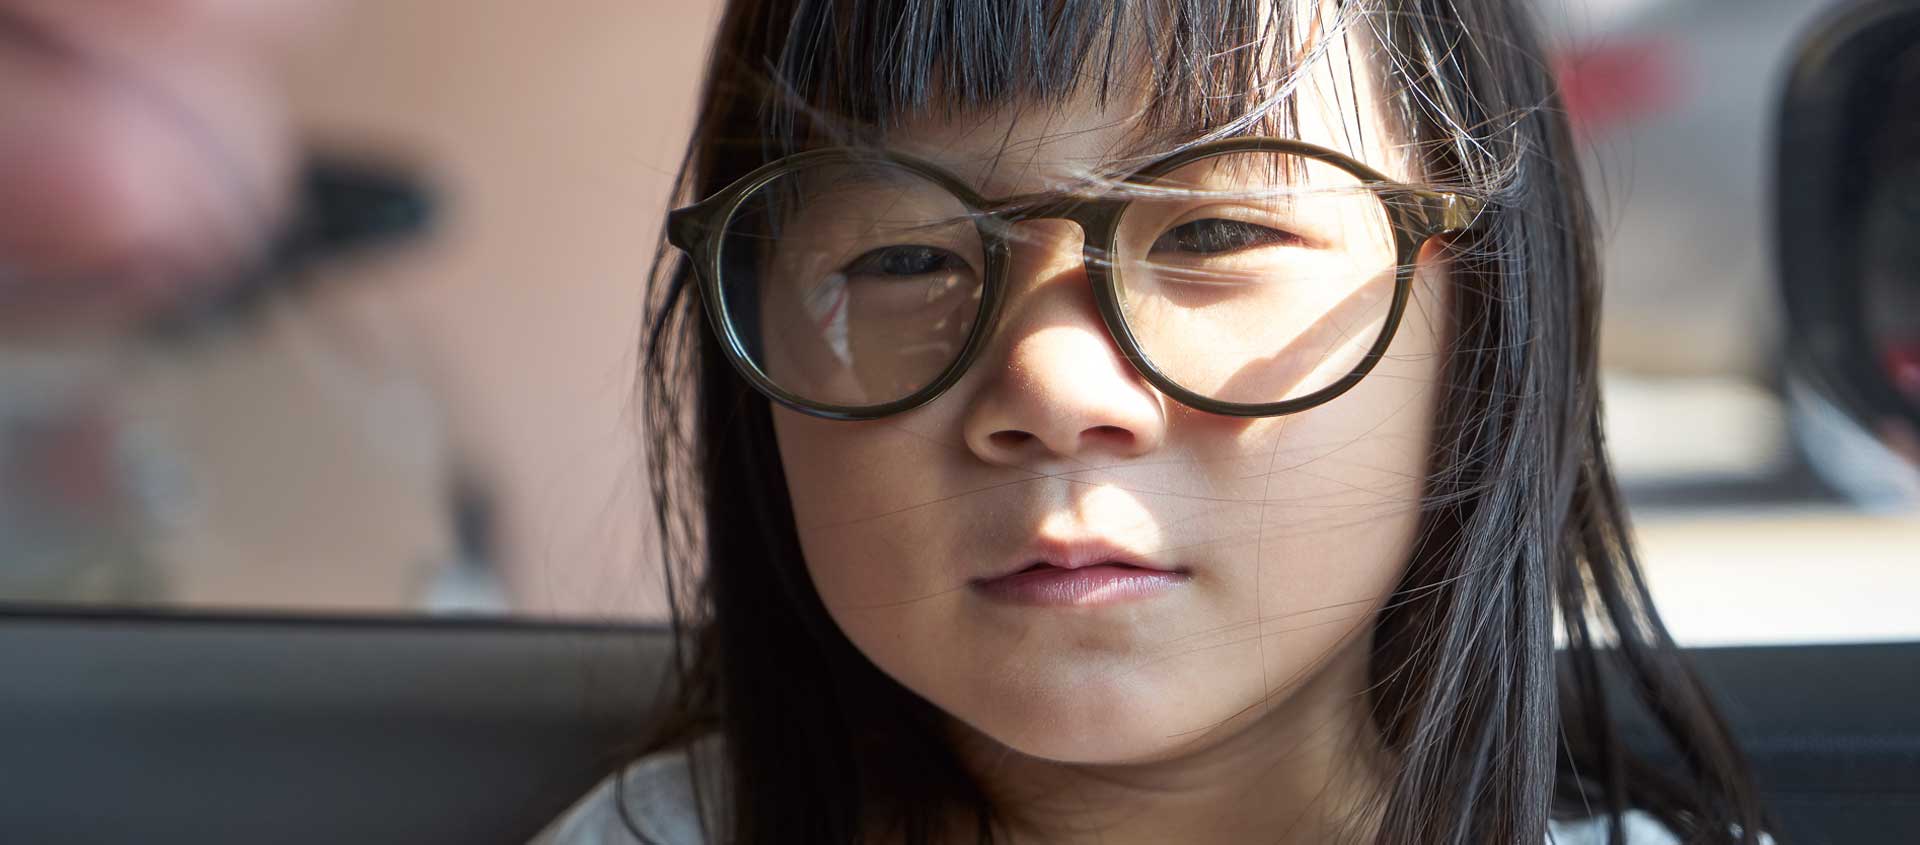 A young Asian girl wearing dark rimmed glasses sits at a table in a restaurant.